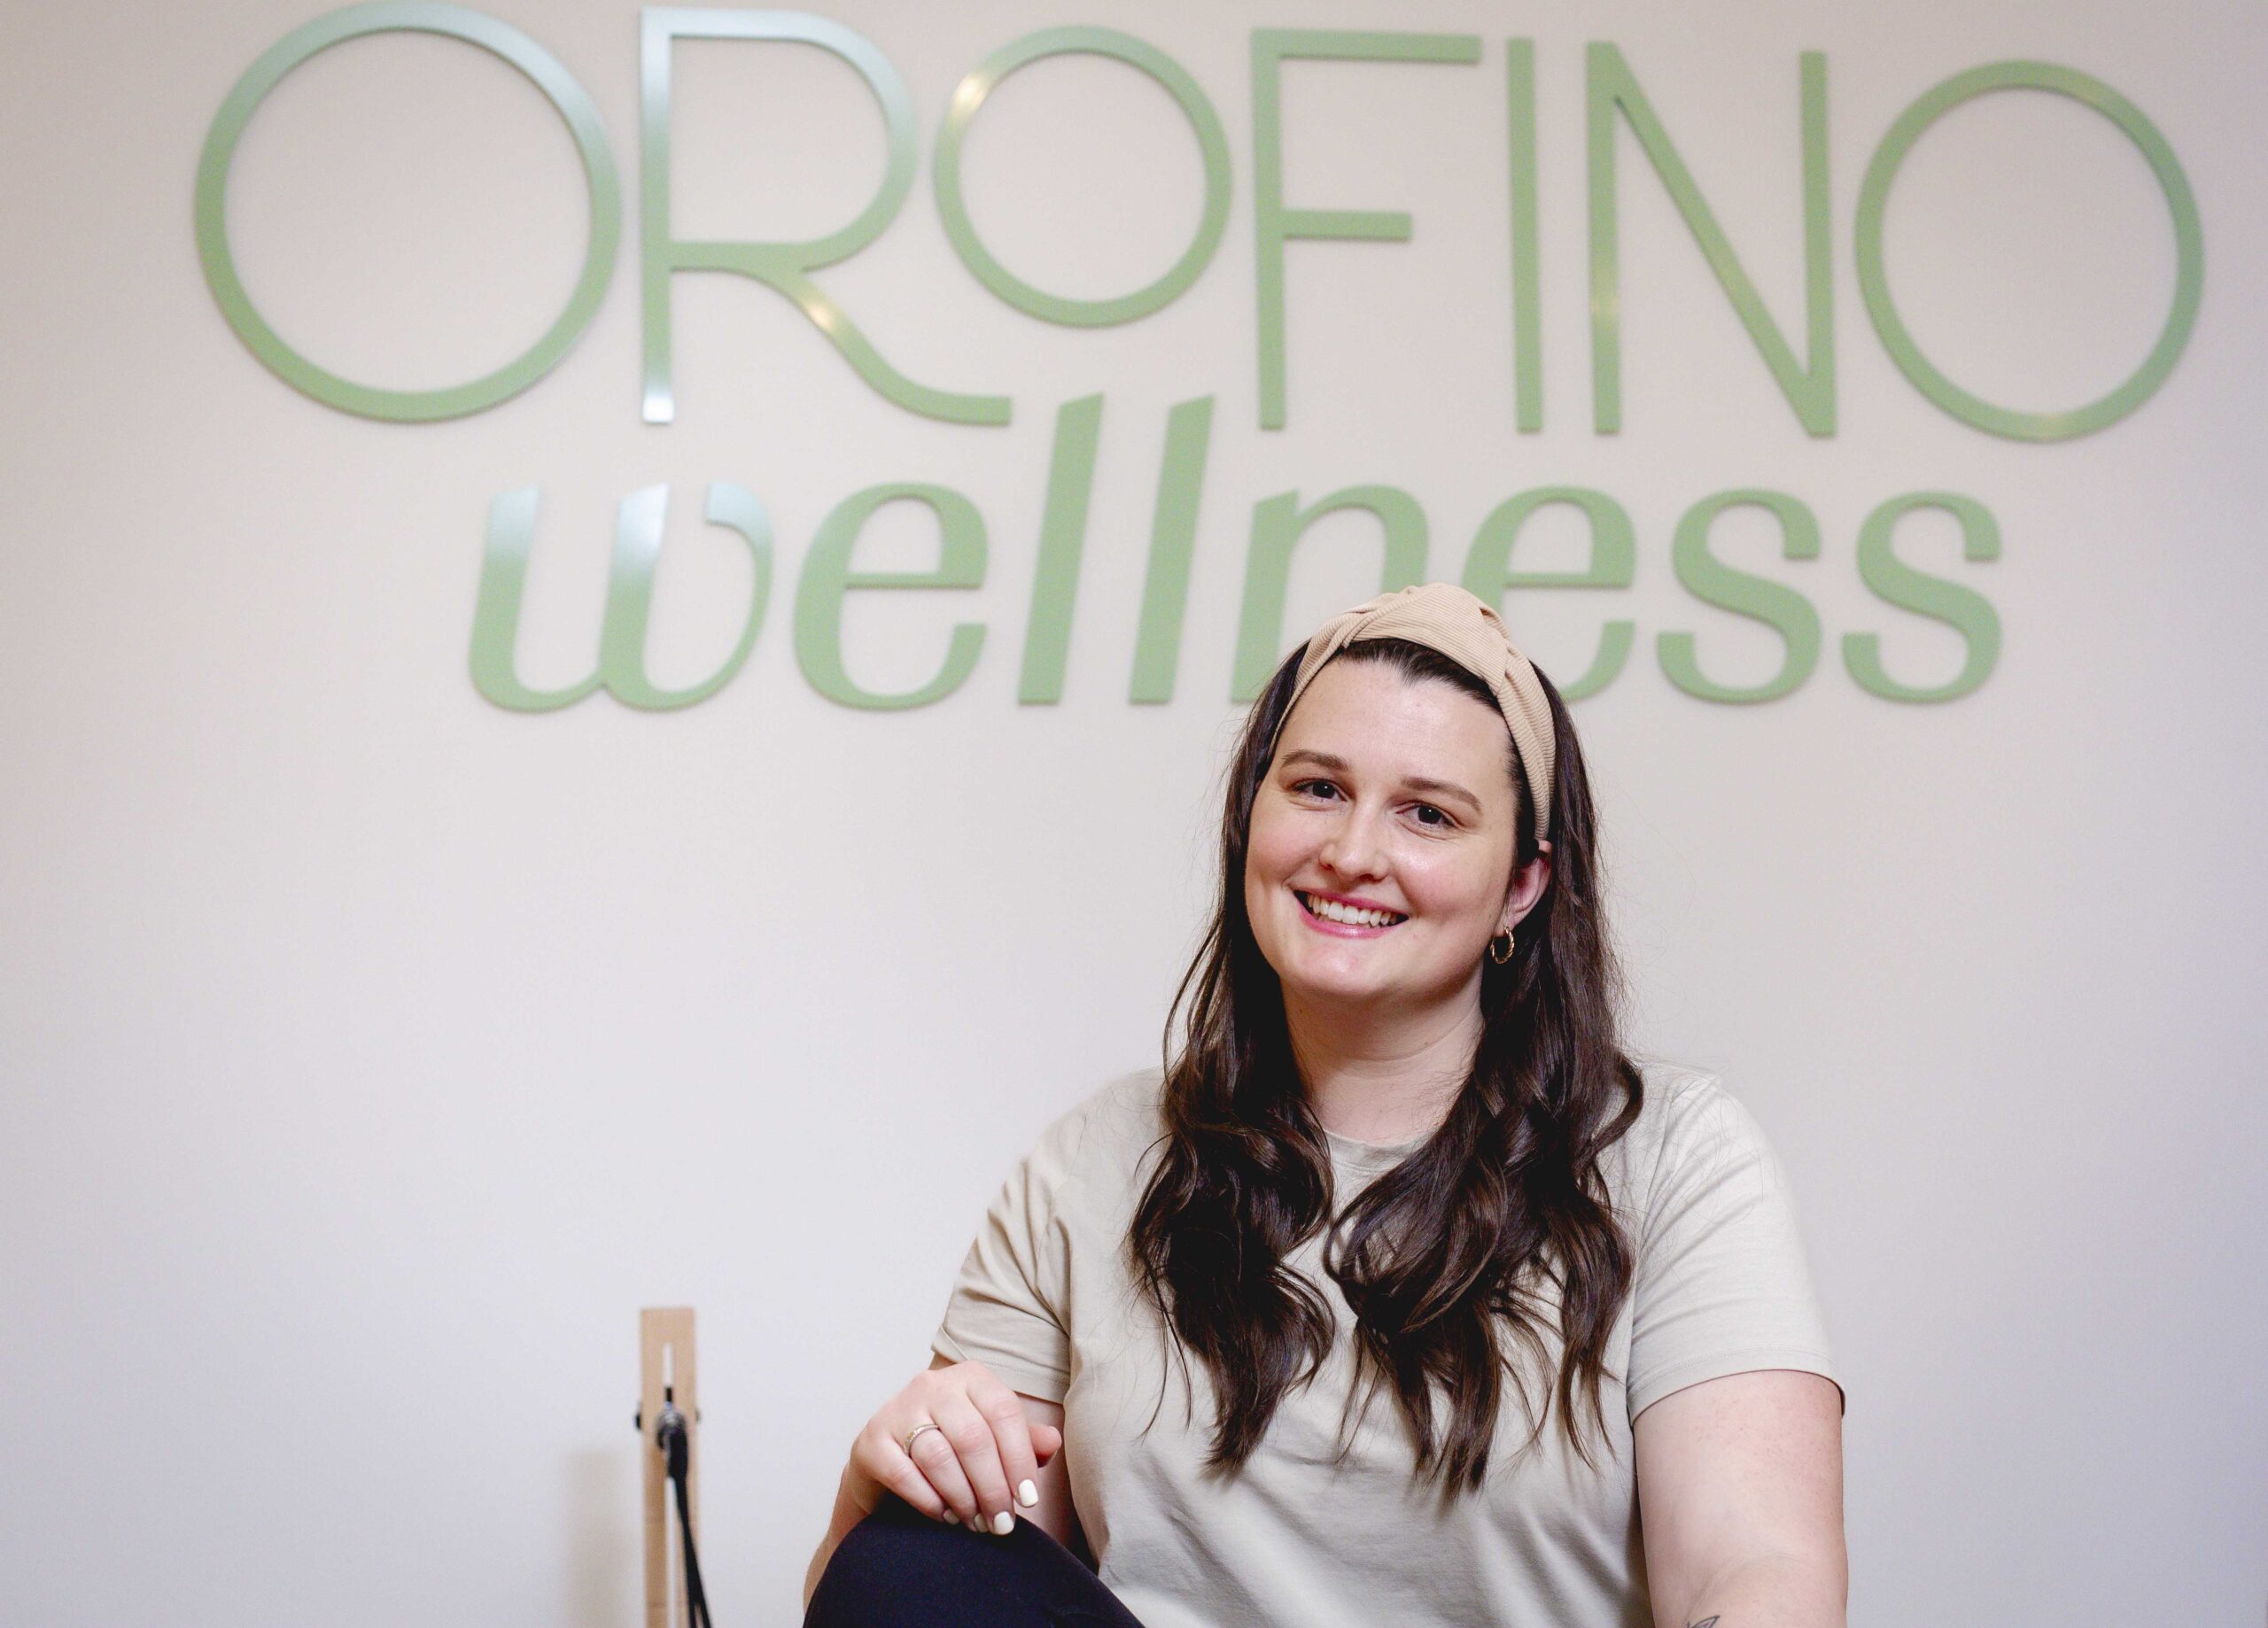 Melanie Meyer in front of the Orofino Wellness sign